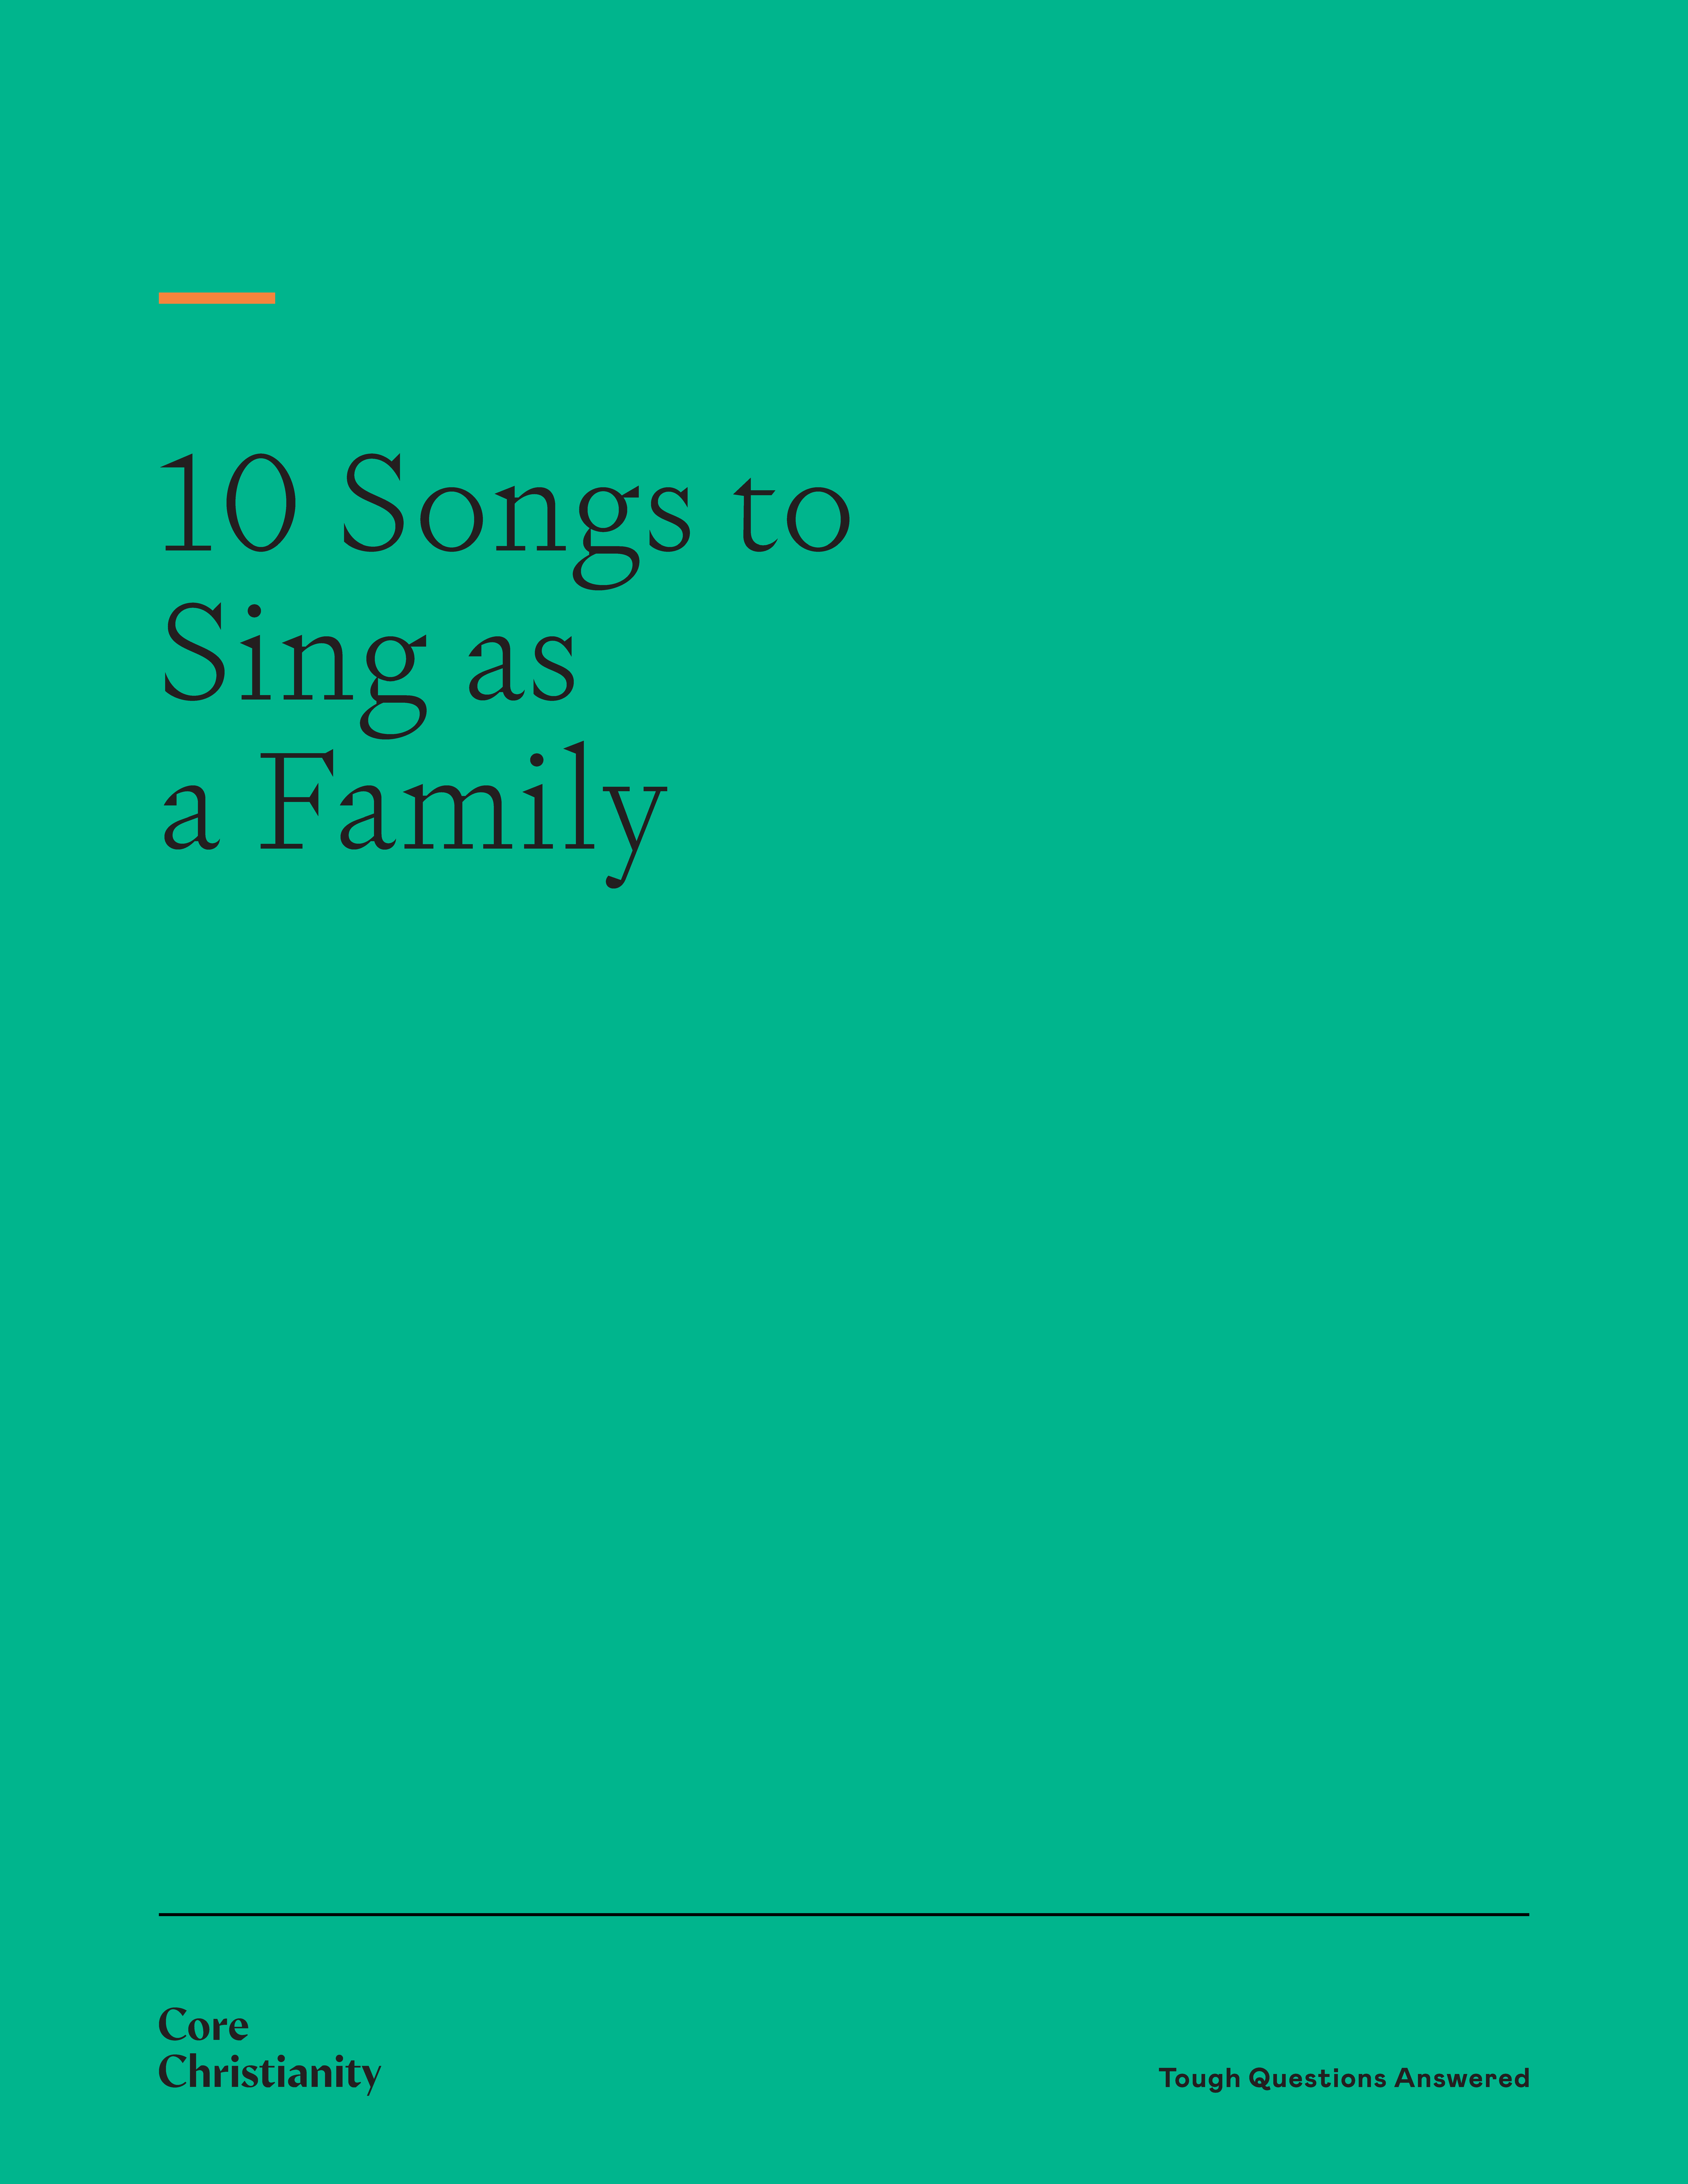 10 Songs to Sing as a Family